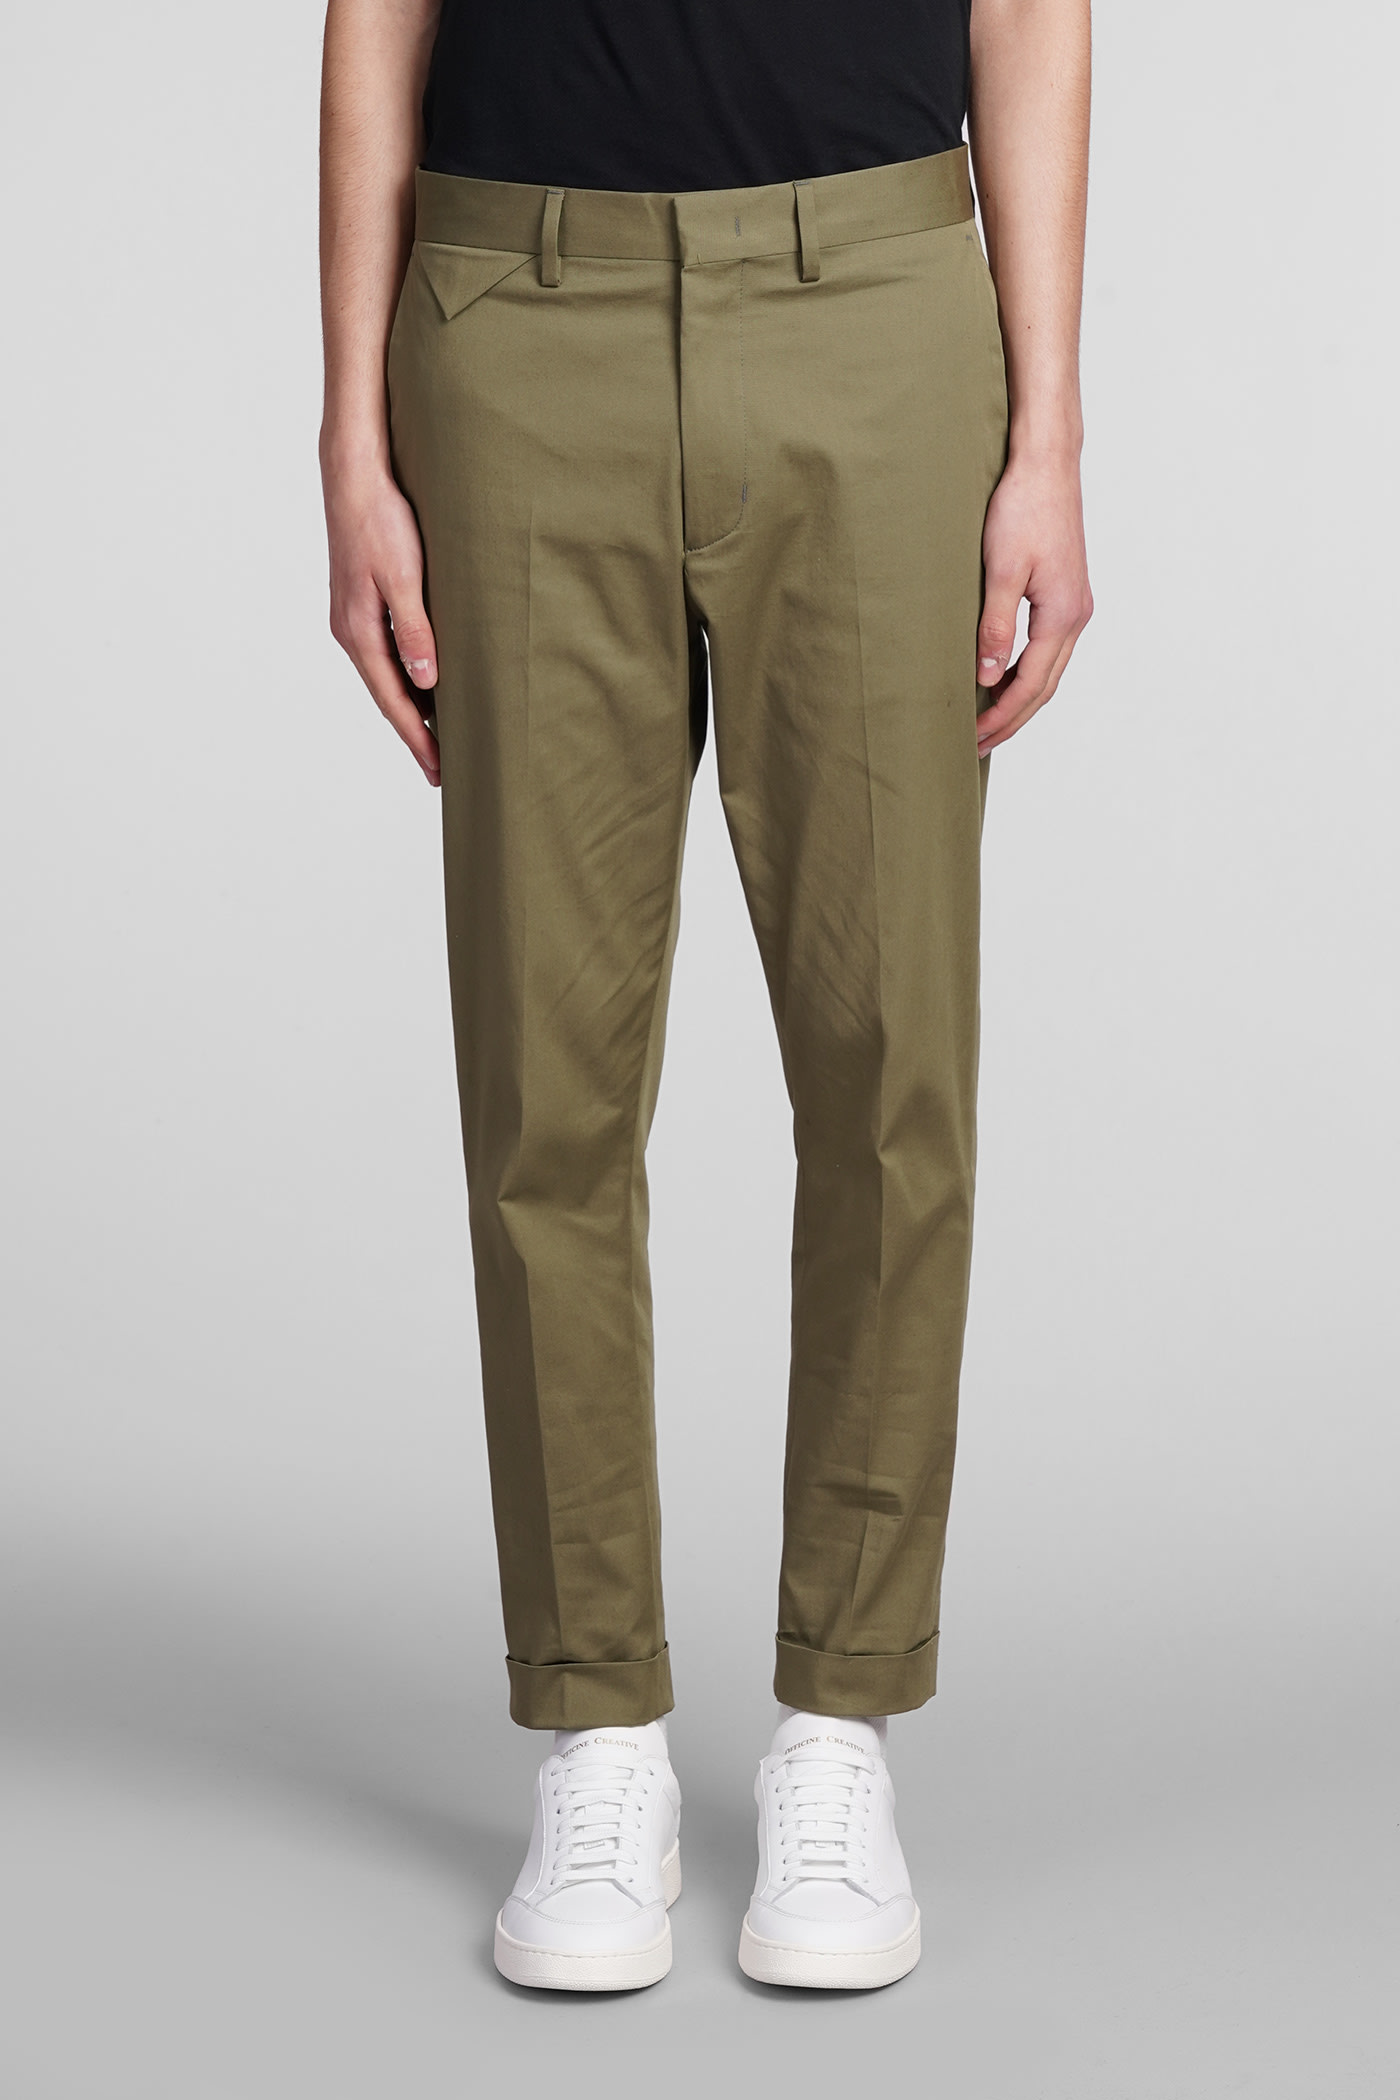 Cooper T1.7 Pants In Green Cotton